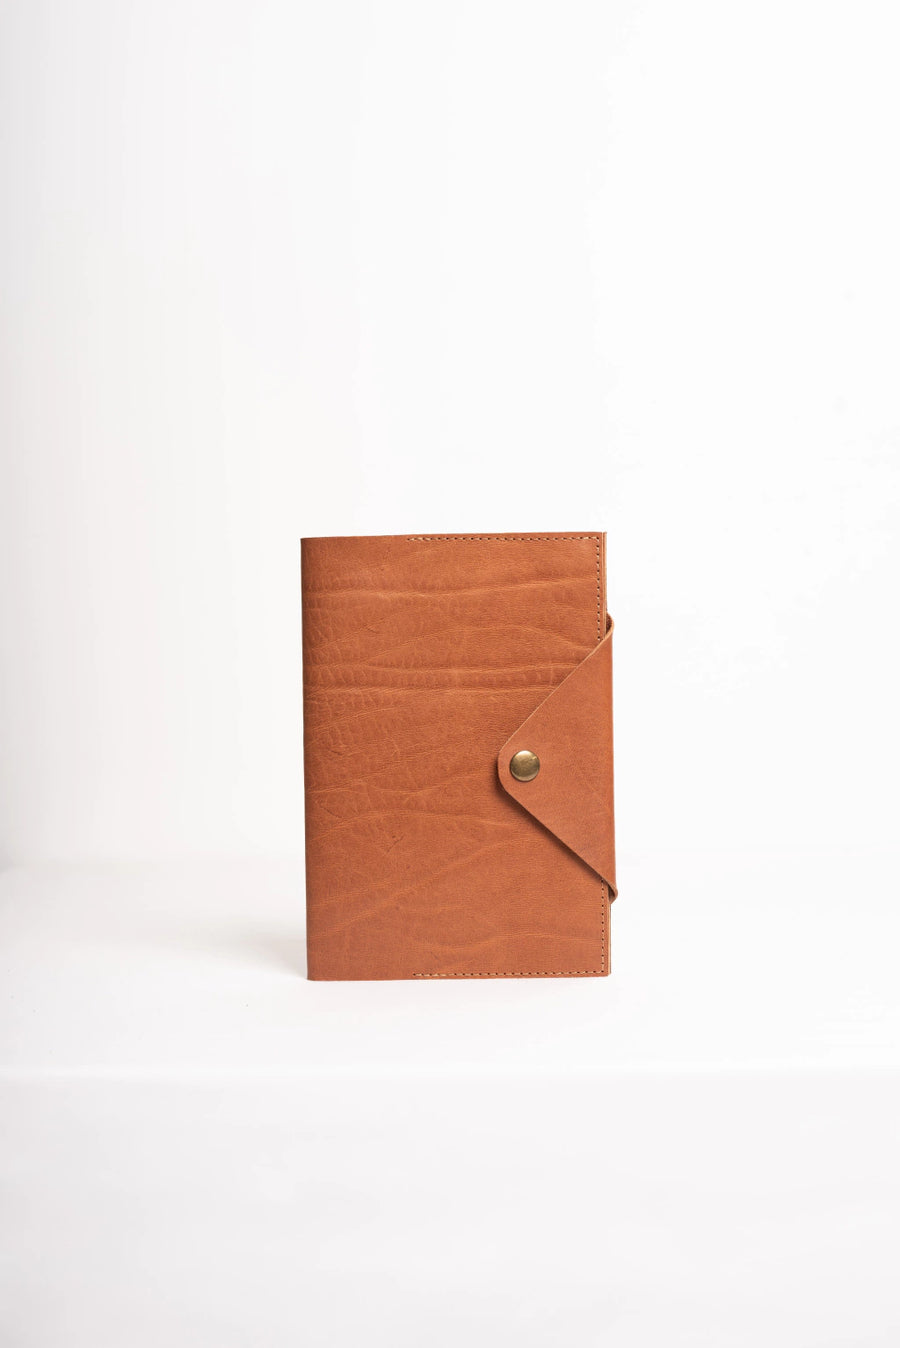 Full grain leather journal. Leather Diary. Leather journal cover. Vegetable tanned leather journal.